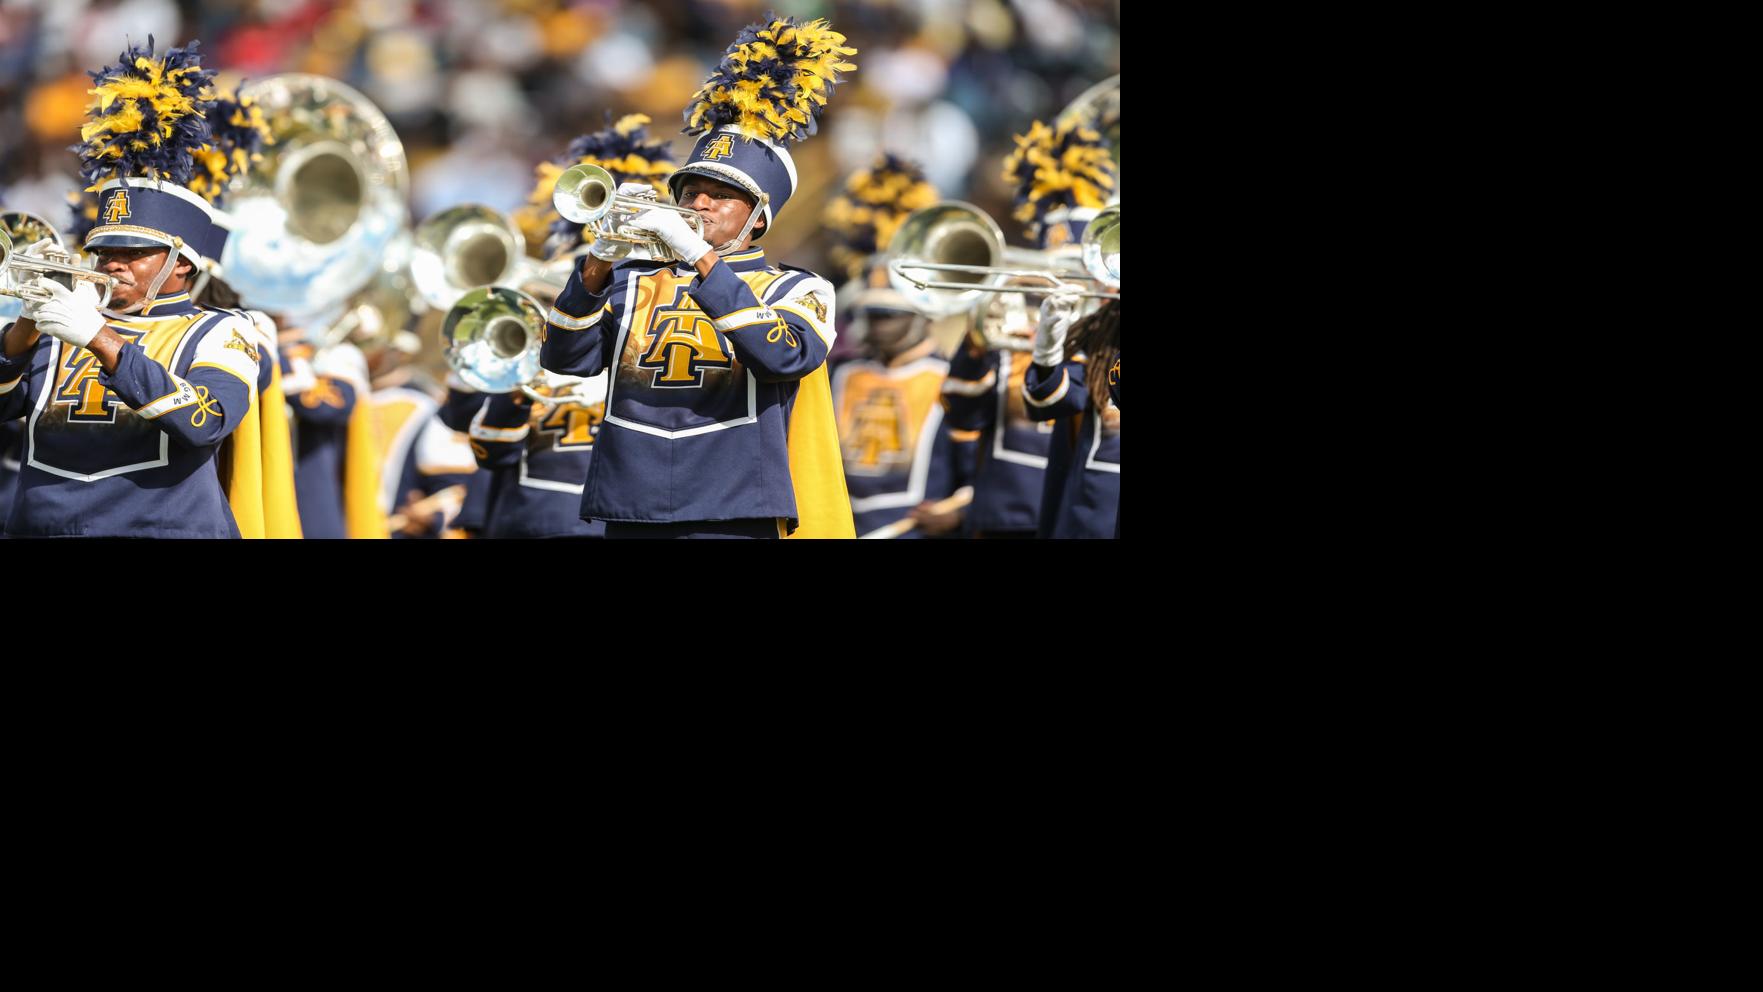 Aggie 2019 Photos and game coverage Ncat